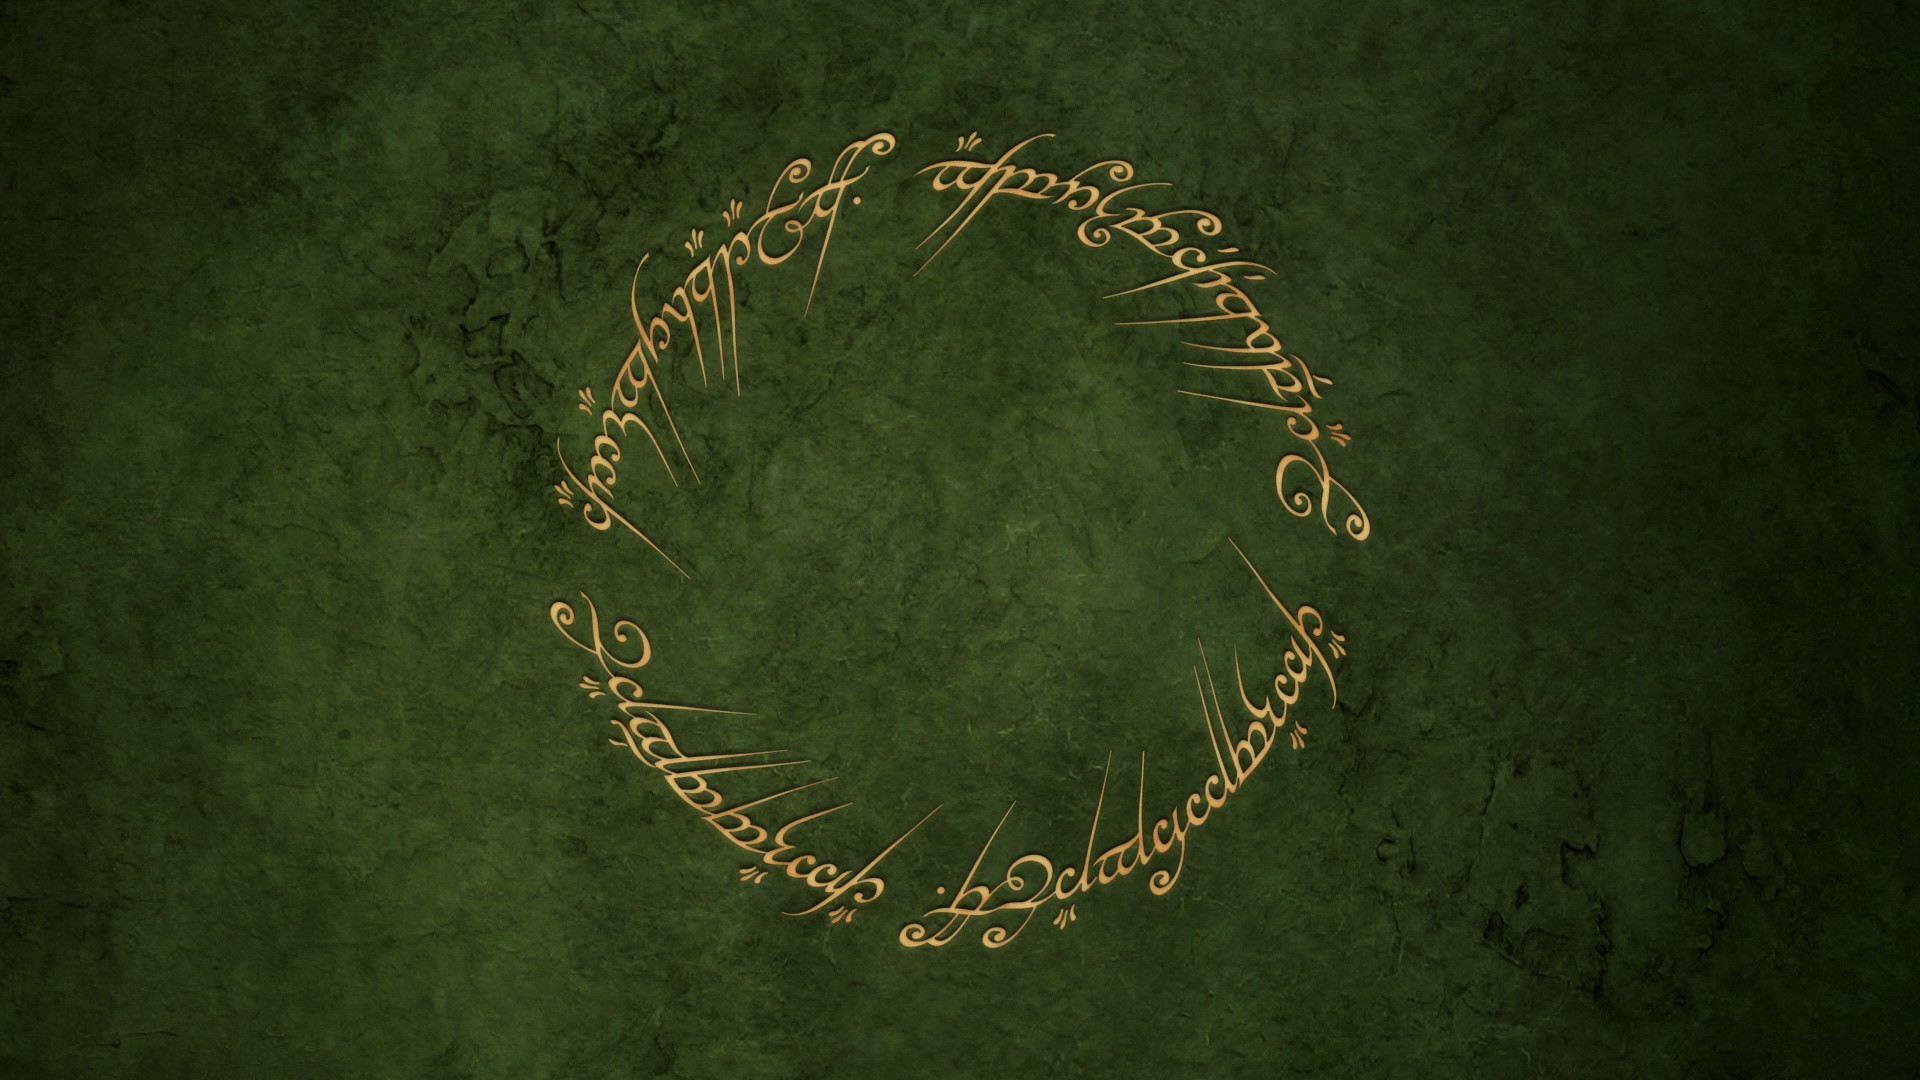 The Lord Of The Rings Wallpaper